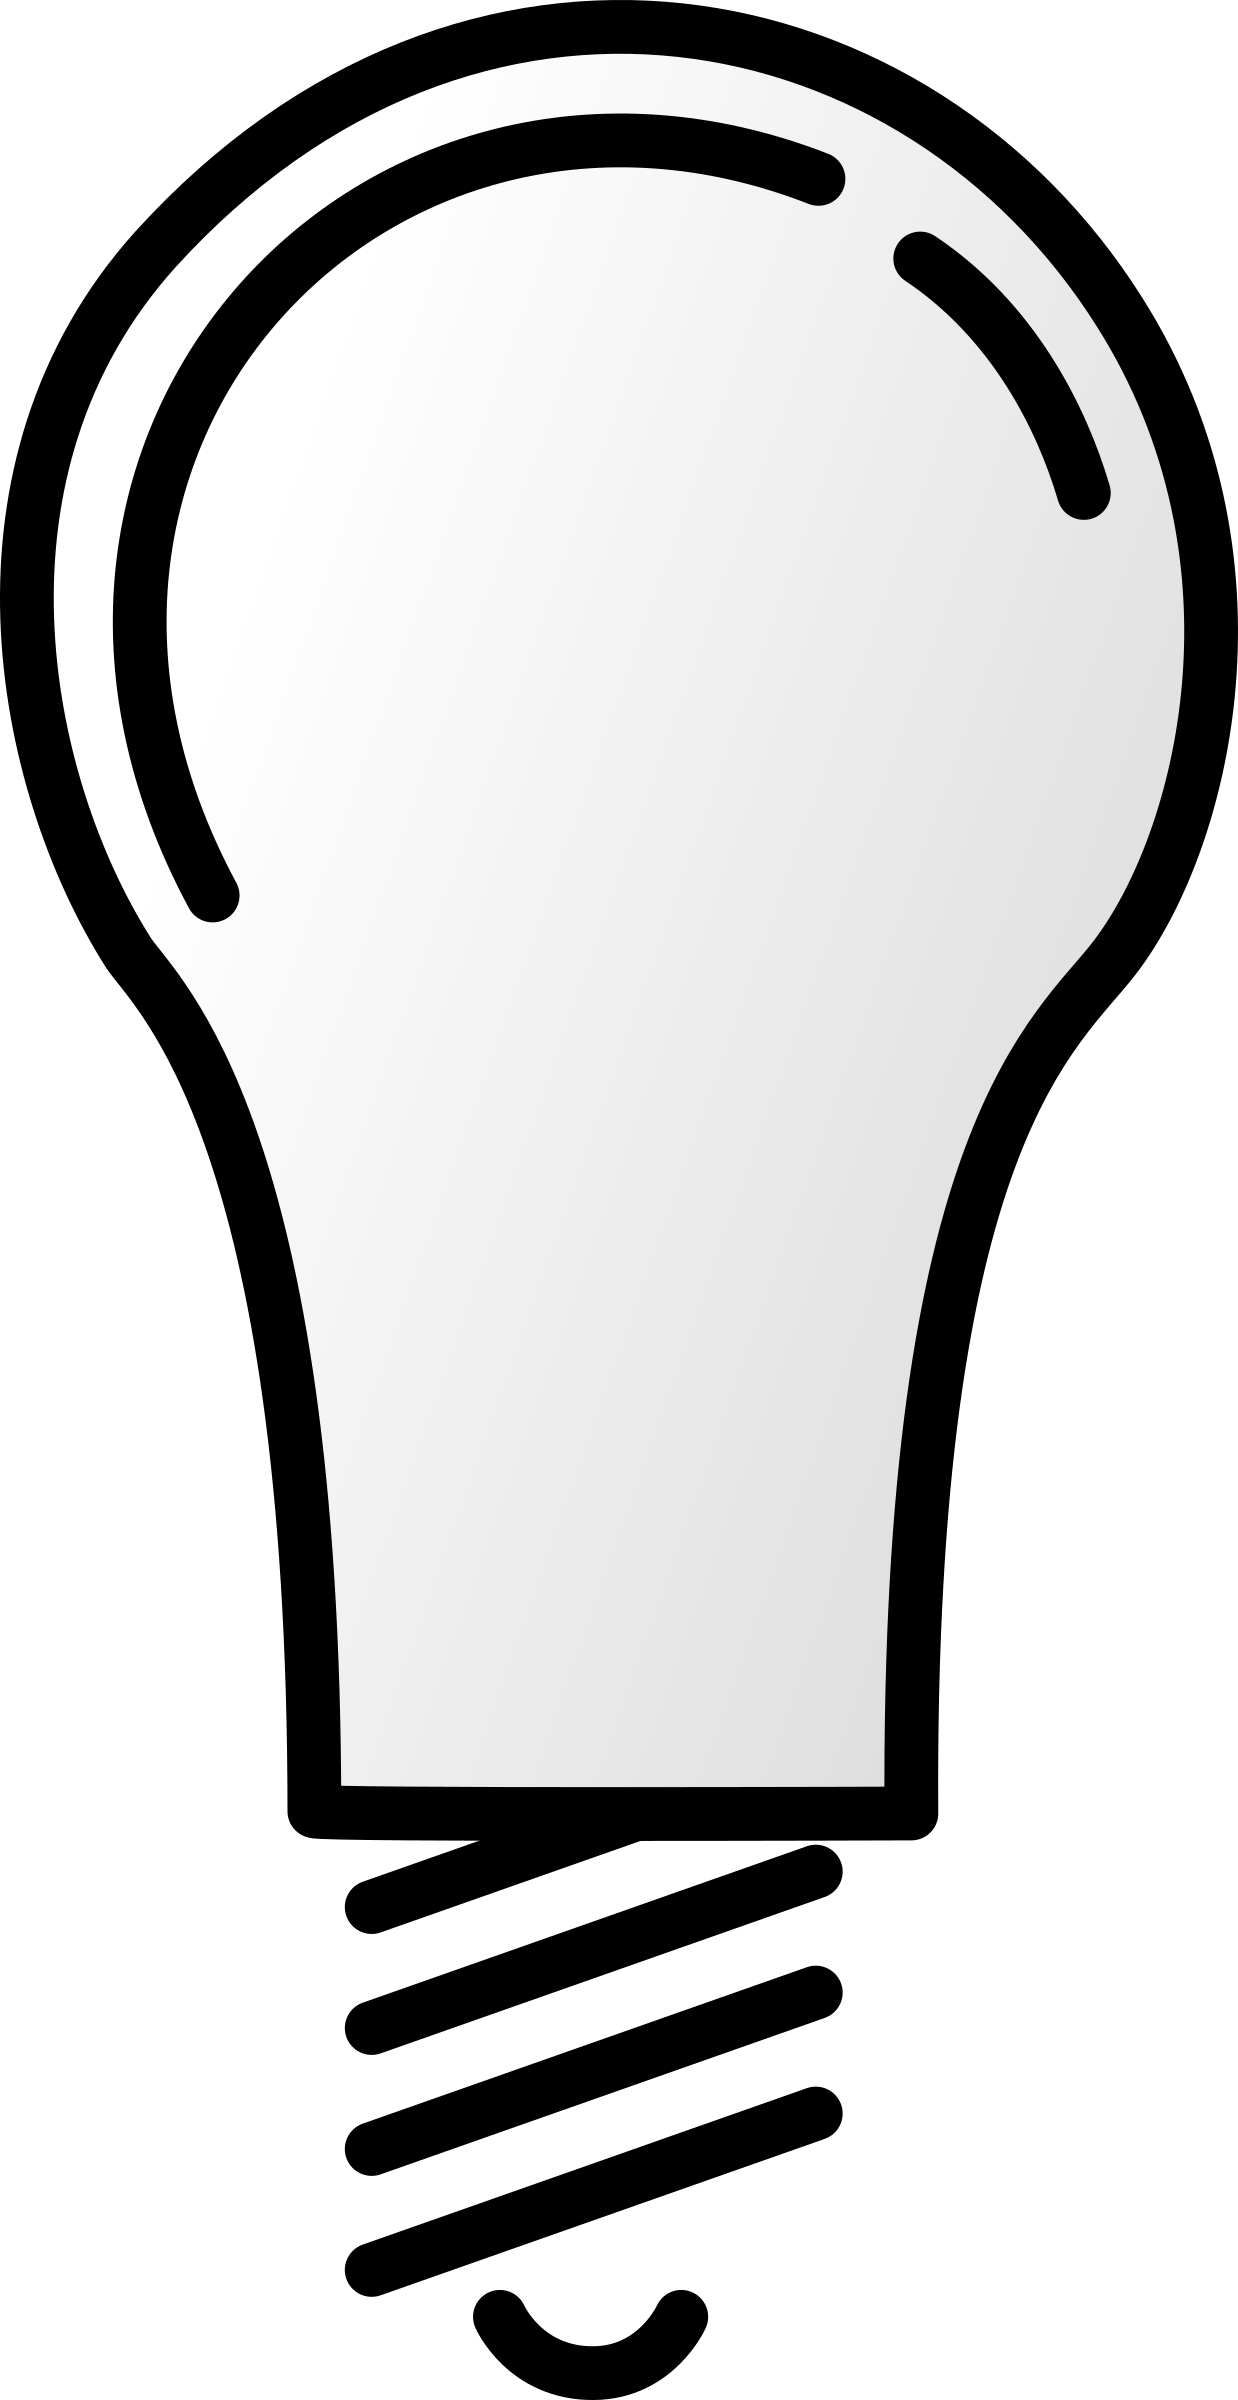 Bulb clipart and images